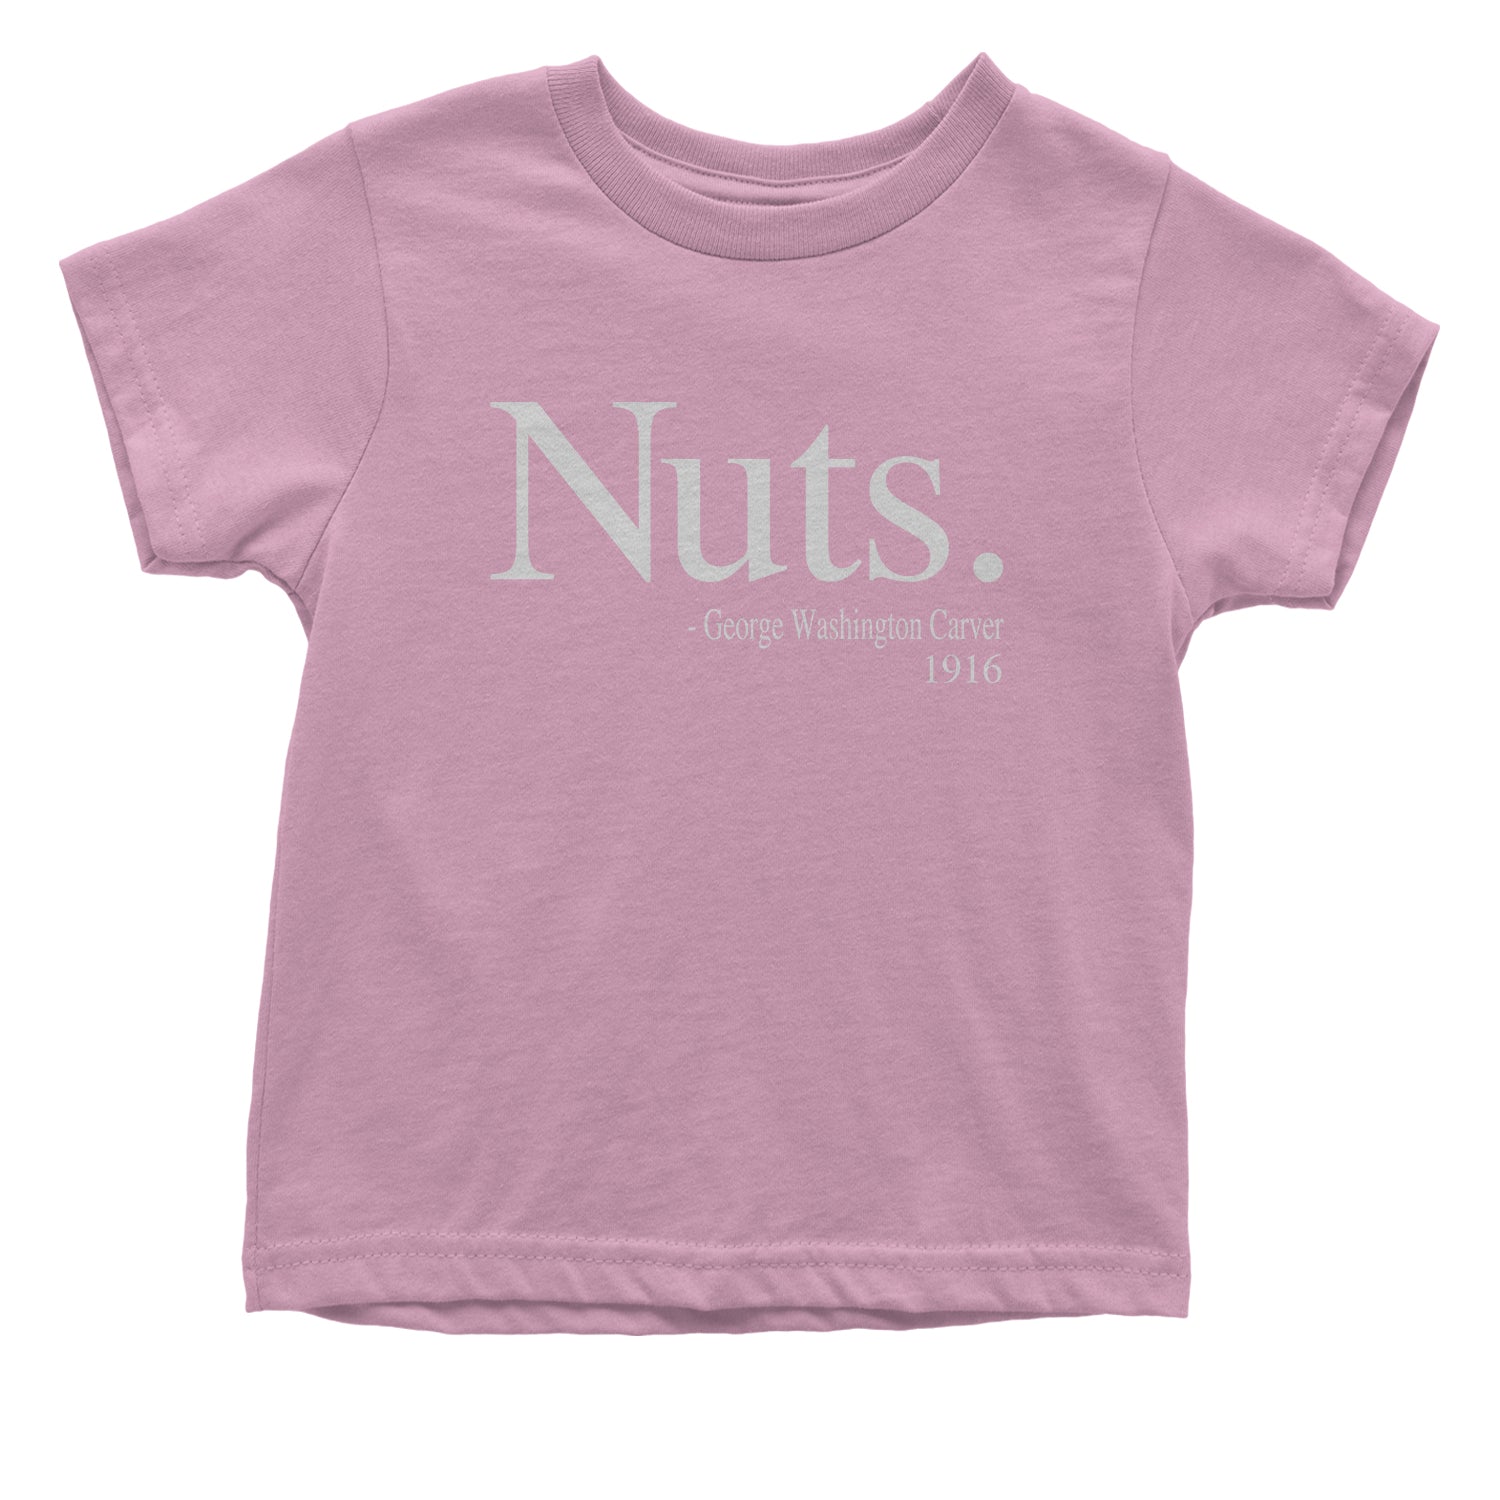 Nuts Quote George Washington Carver Toddler T-Shirt african, african american, afro, american, black, carver, george, go, harriet, history, malcolm, me, nah, nuts, out, parks, rosa, try, tubman, washington, we, x by Expression Tees